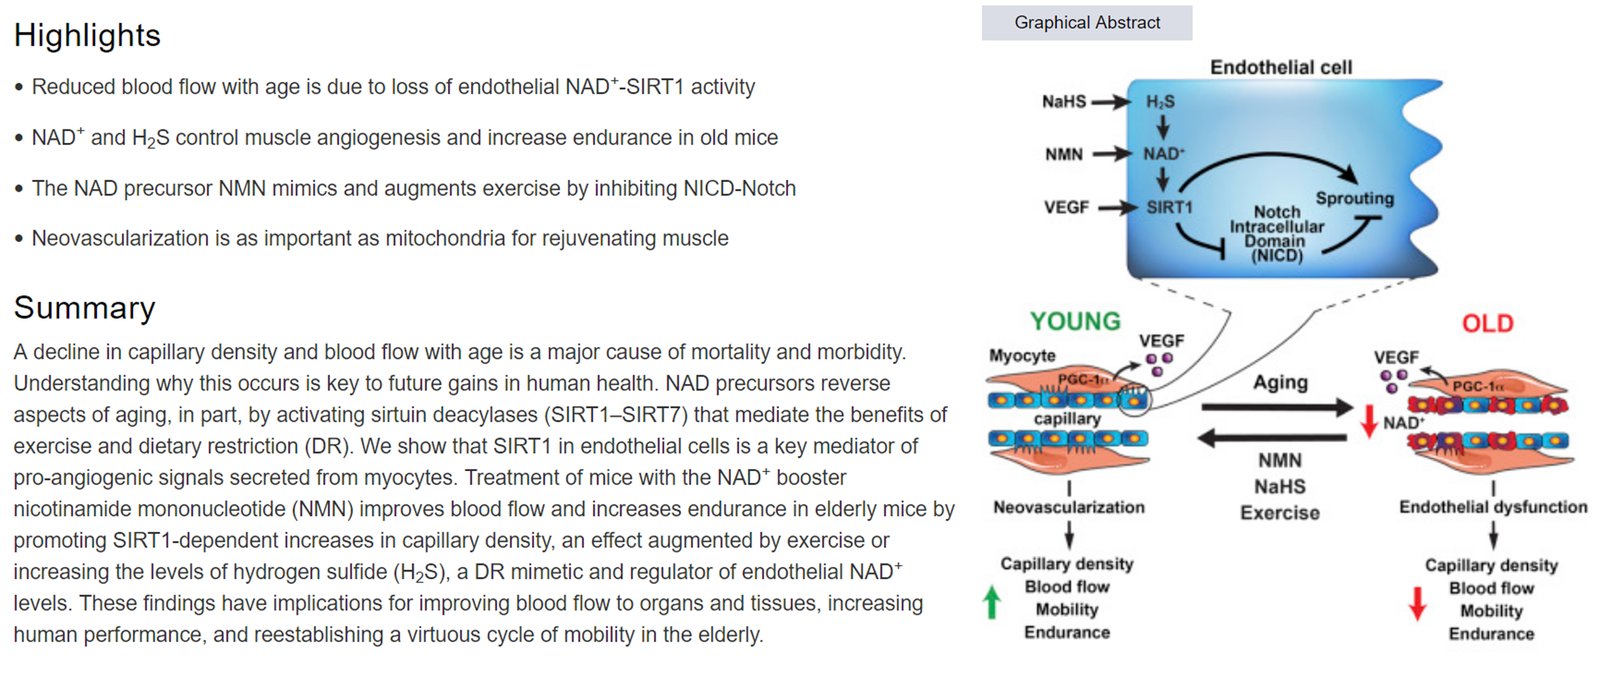 Impairment of an Endothelial NAD H2S Signaling Network Is a Reversible Cause of Vascular Aging